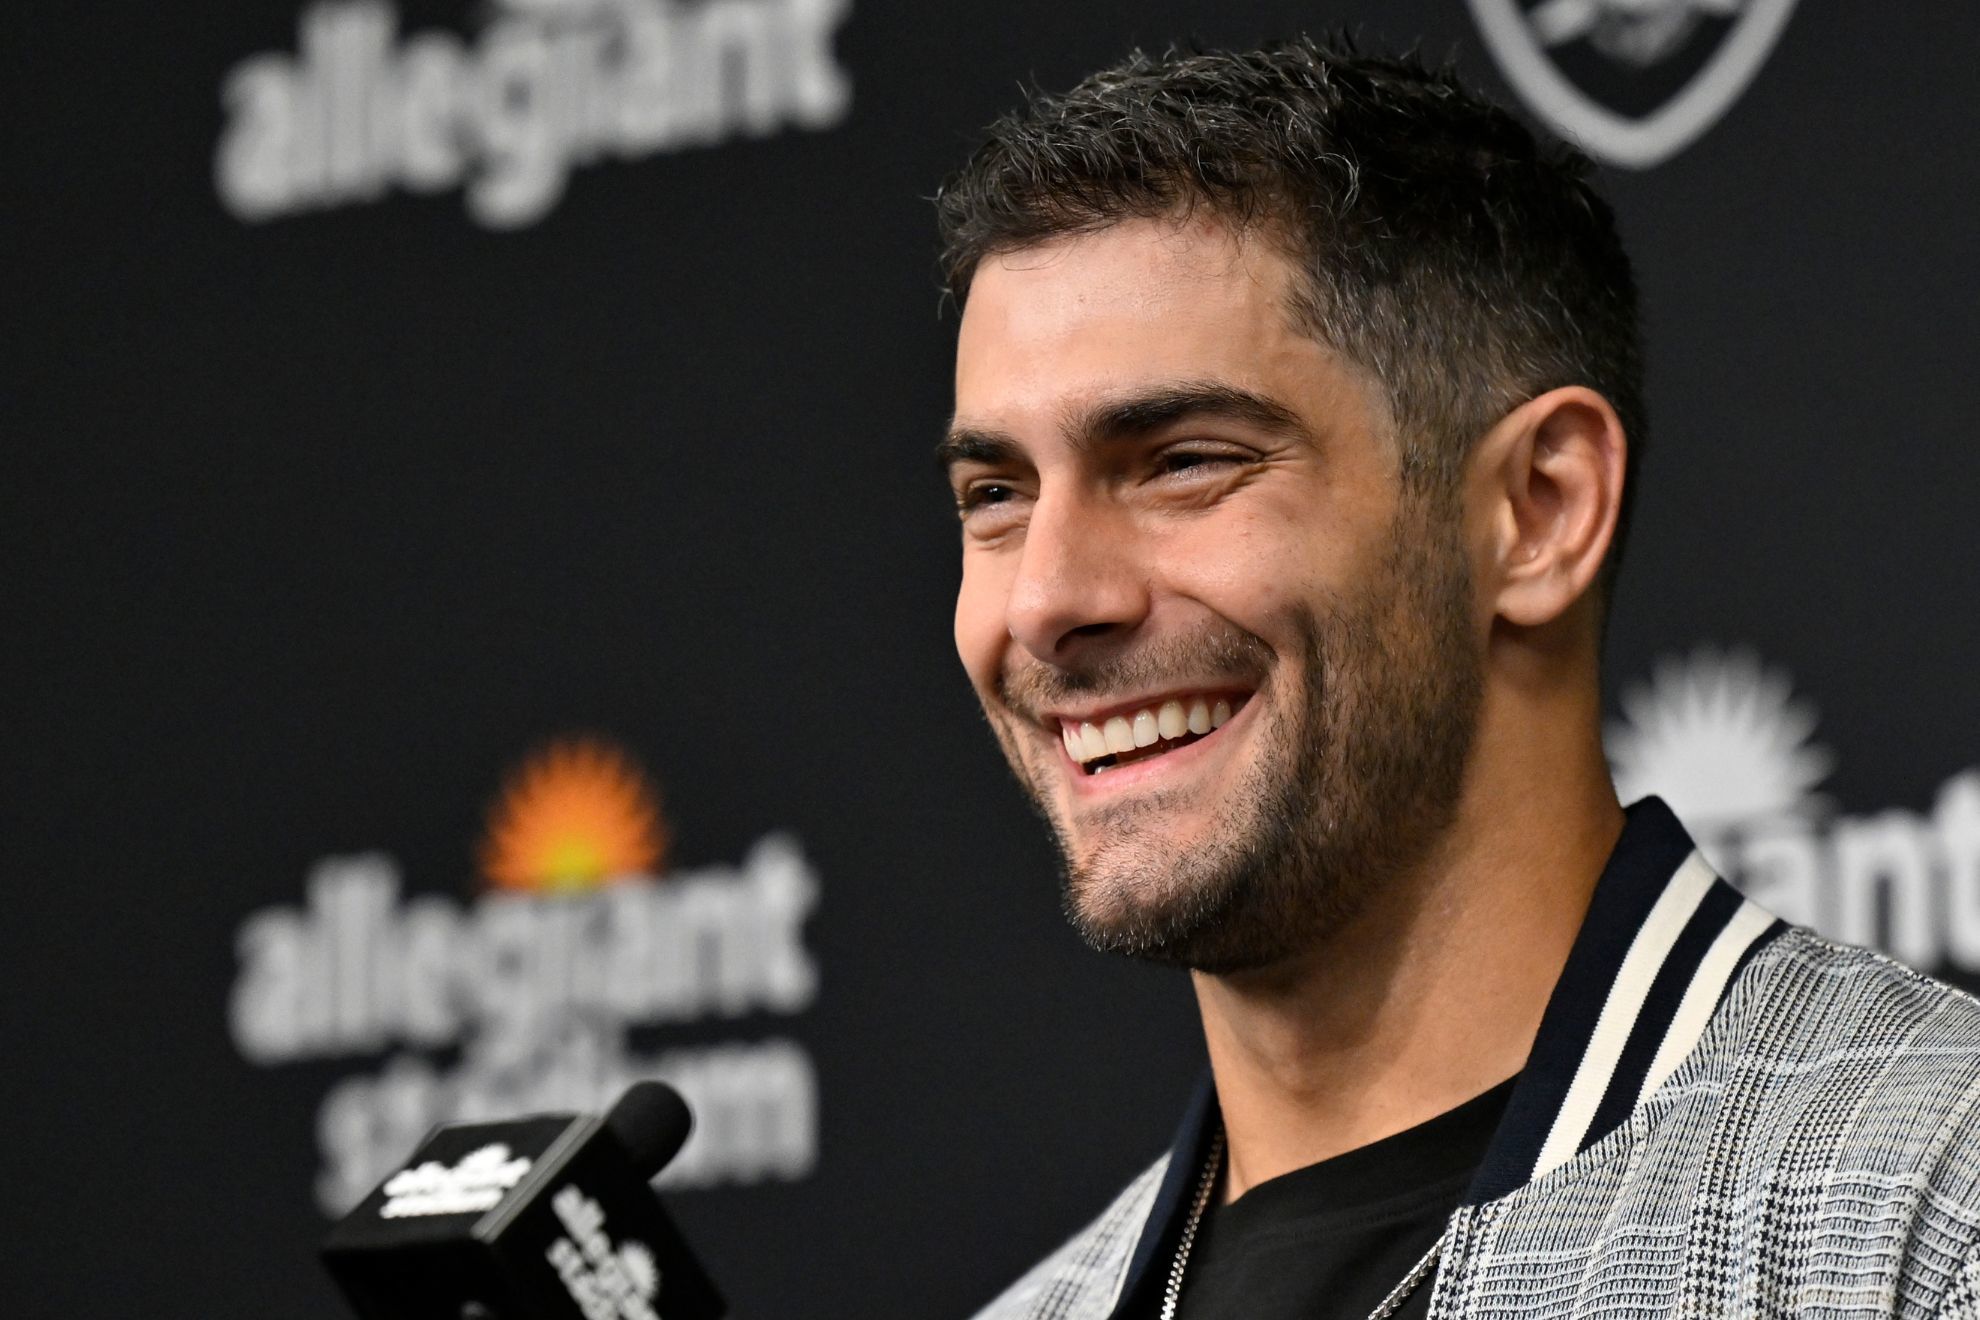 Jimmy Garoppolo gets a third chance for redemption, this time with the Rams